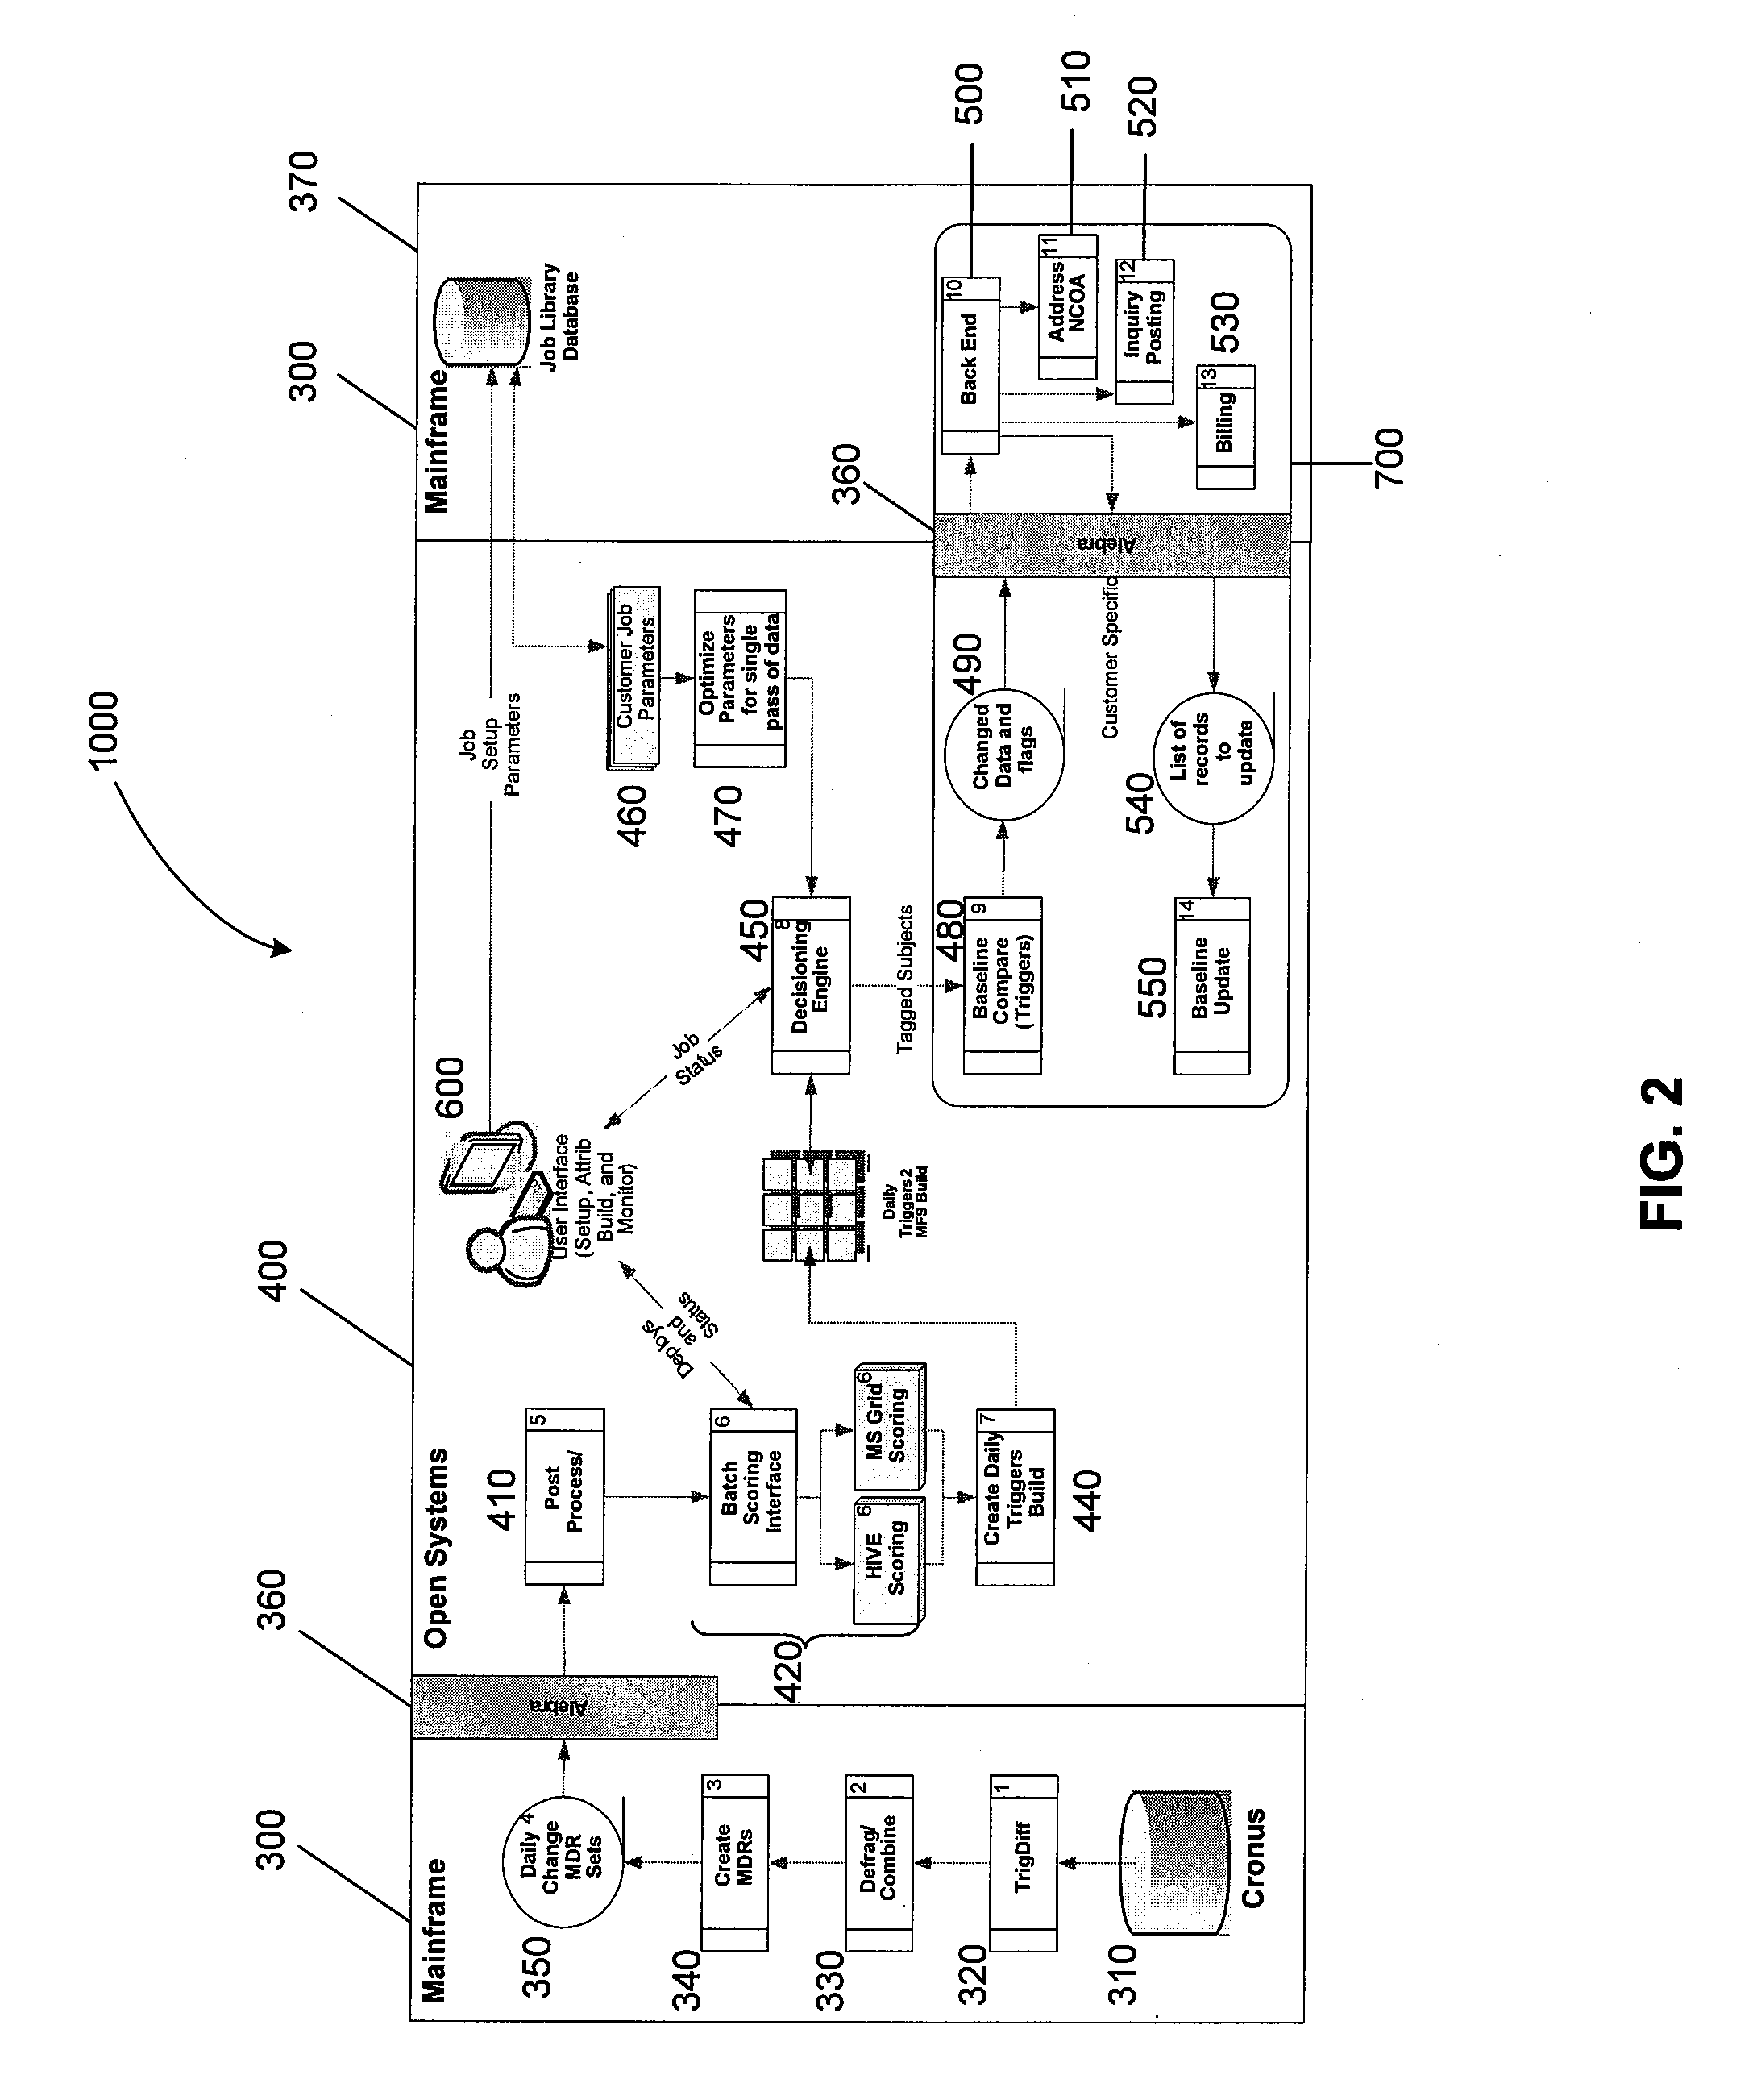 Method and system for batch execution of variable input data